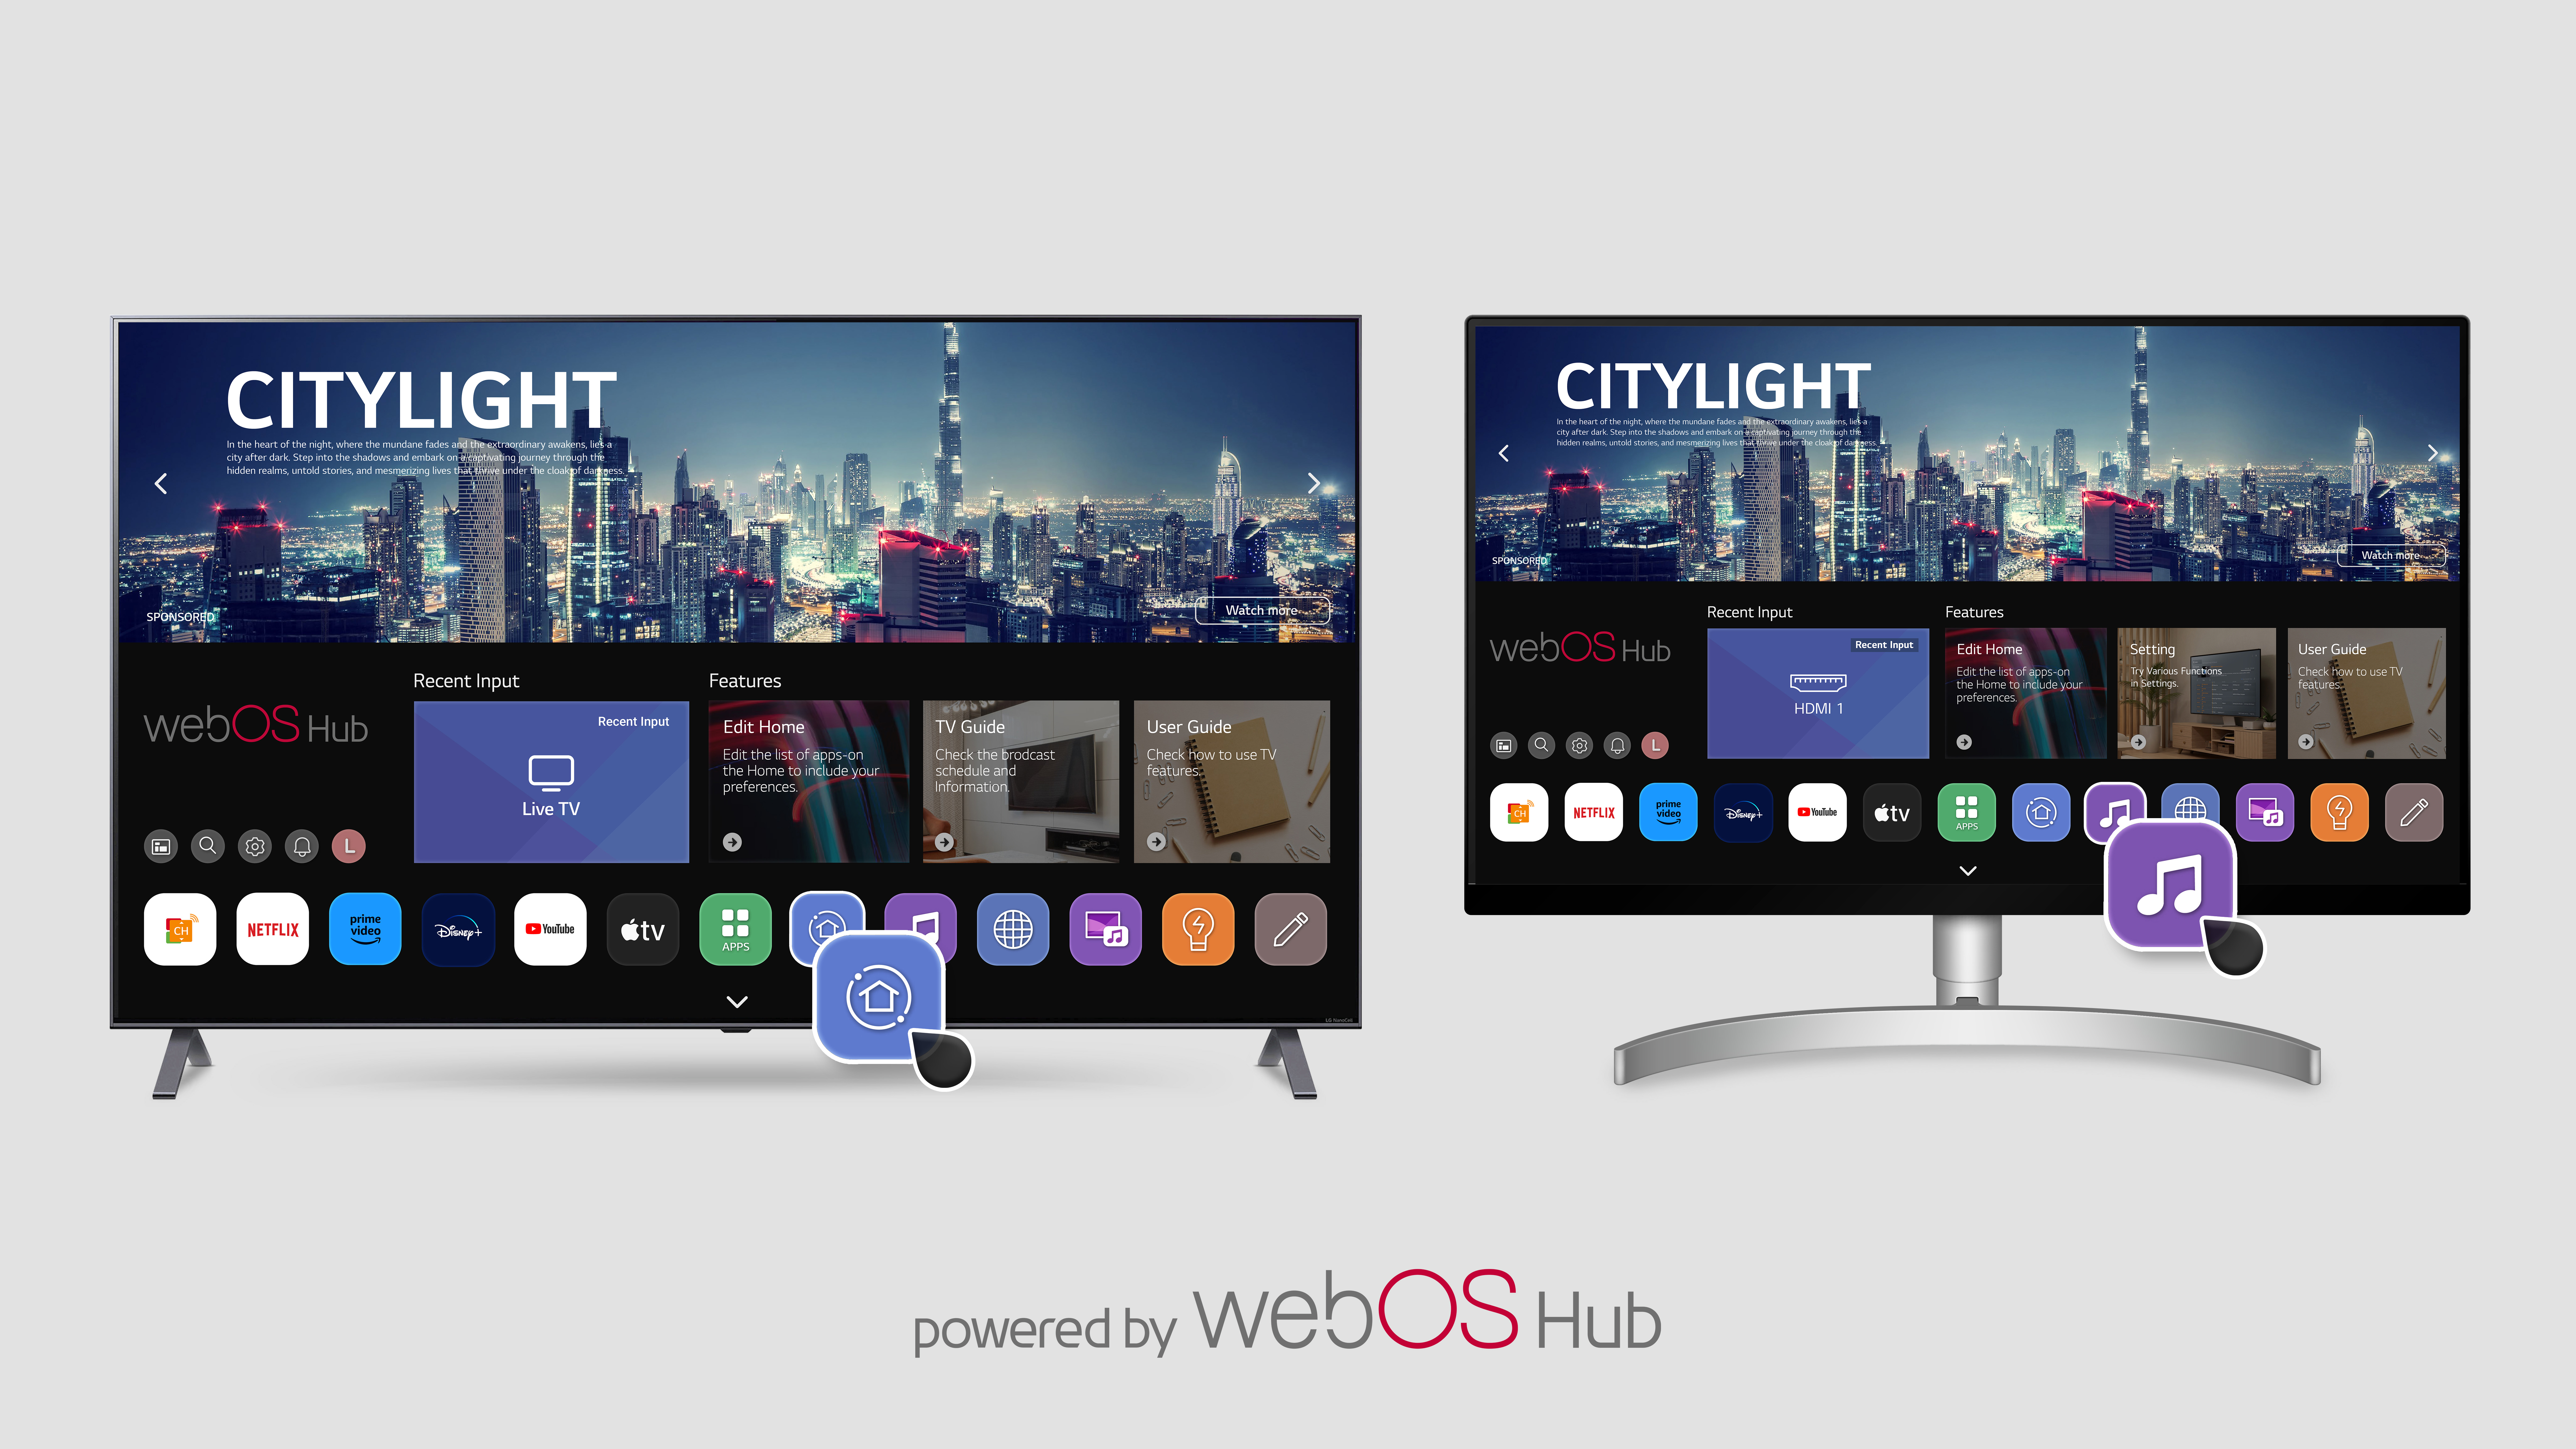 The webOS TV screen with new webOS Hub design